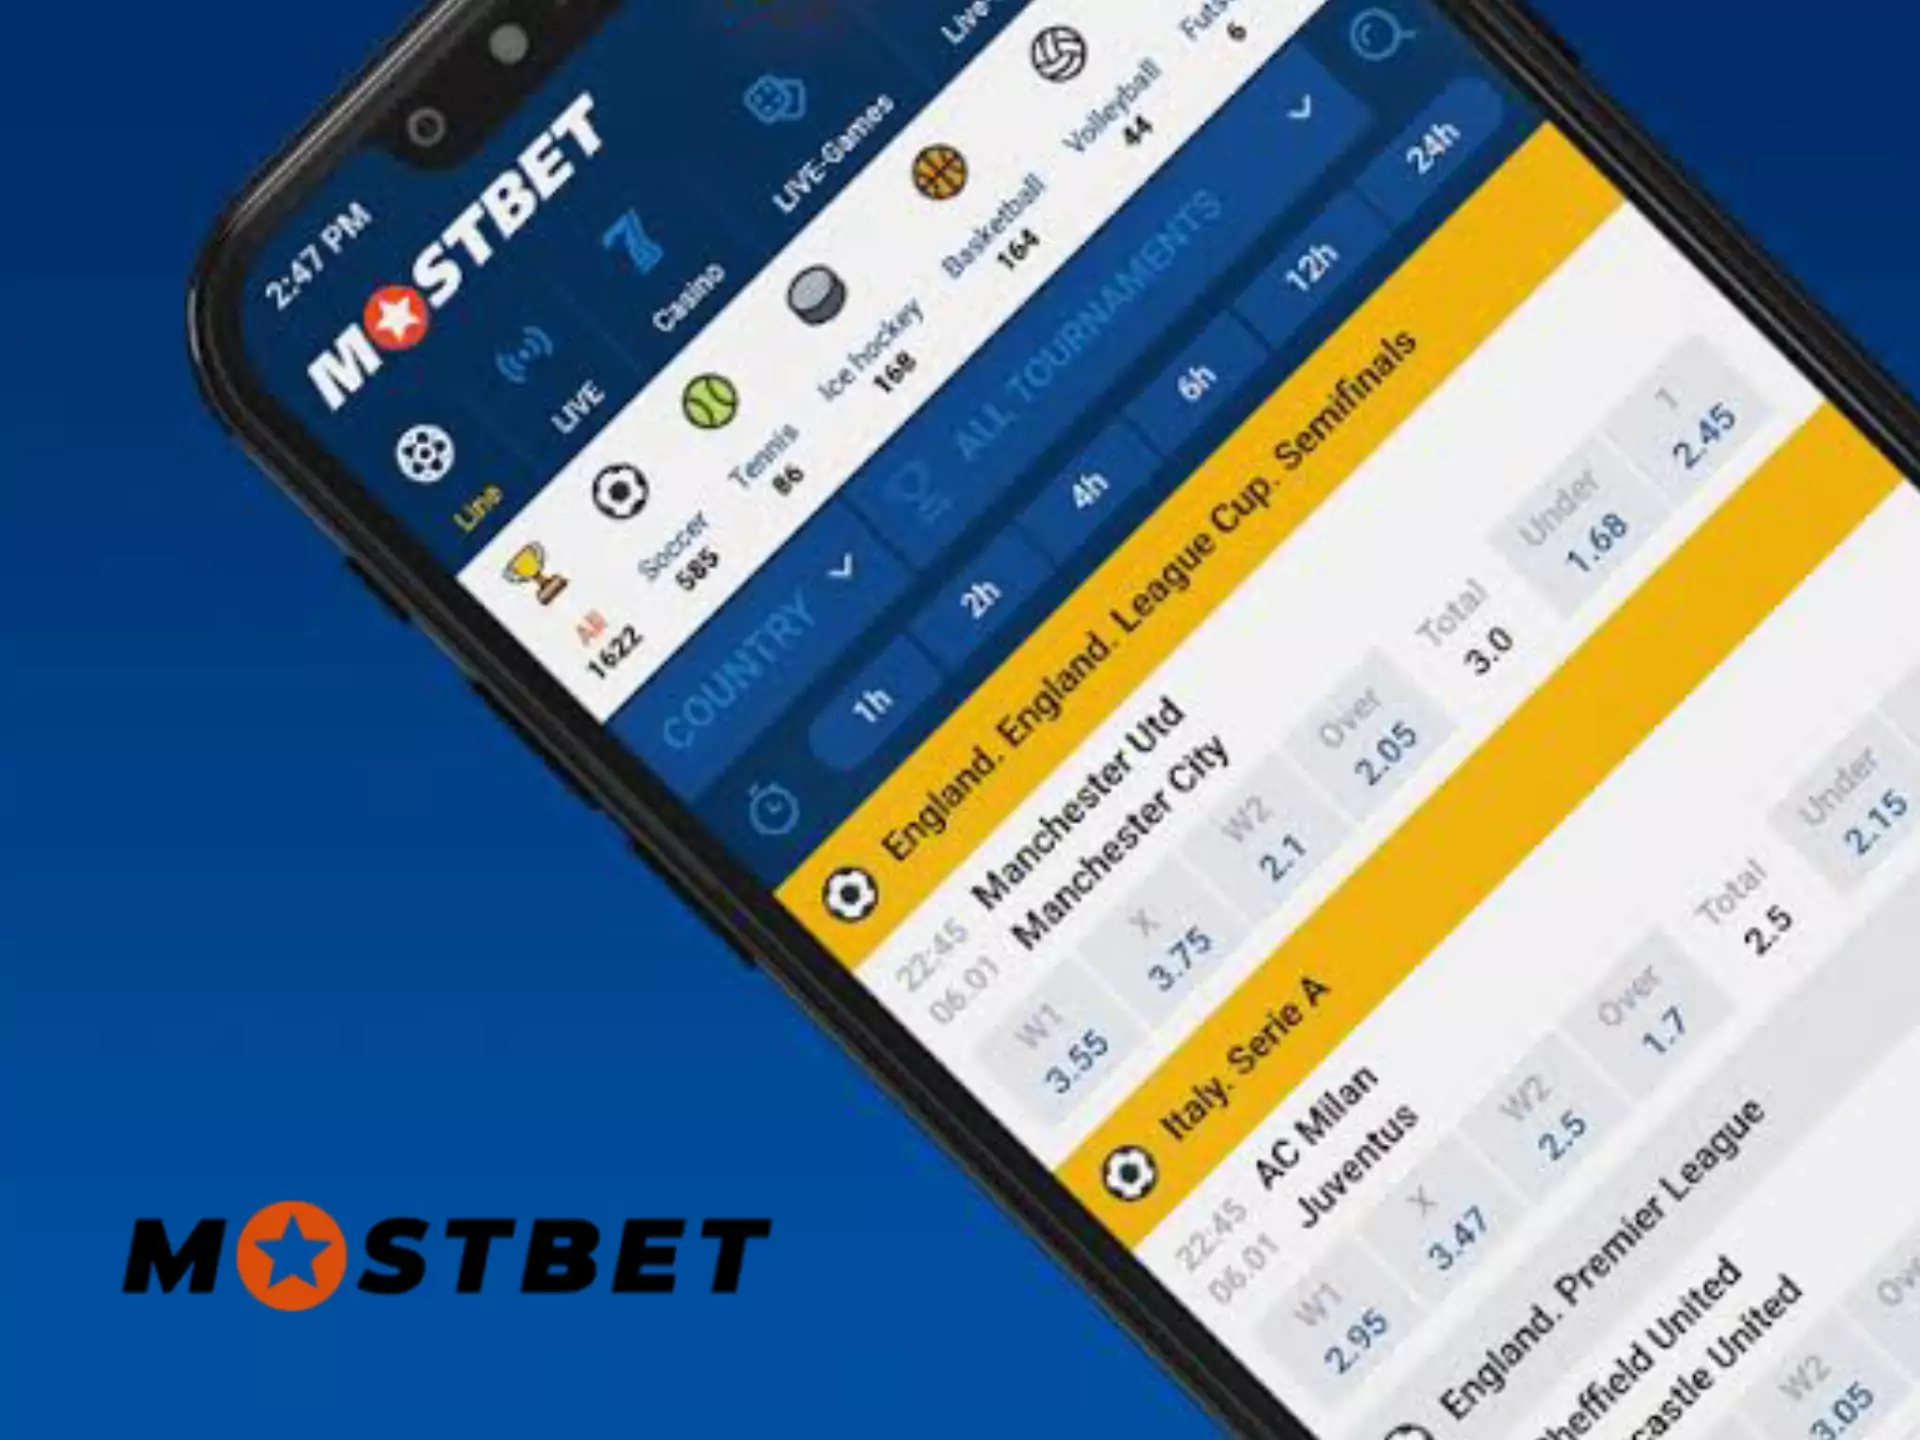 You should register and top up your Mostbet account to place bets.